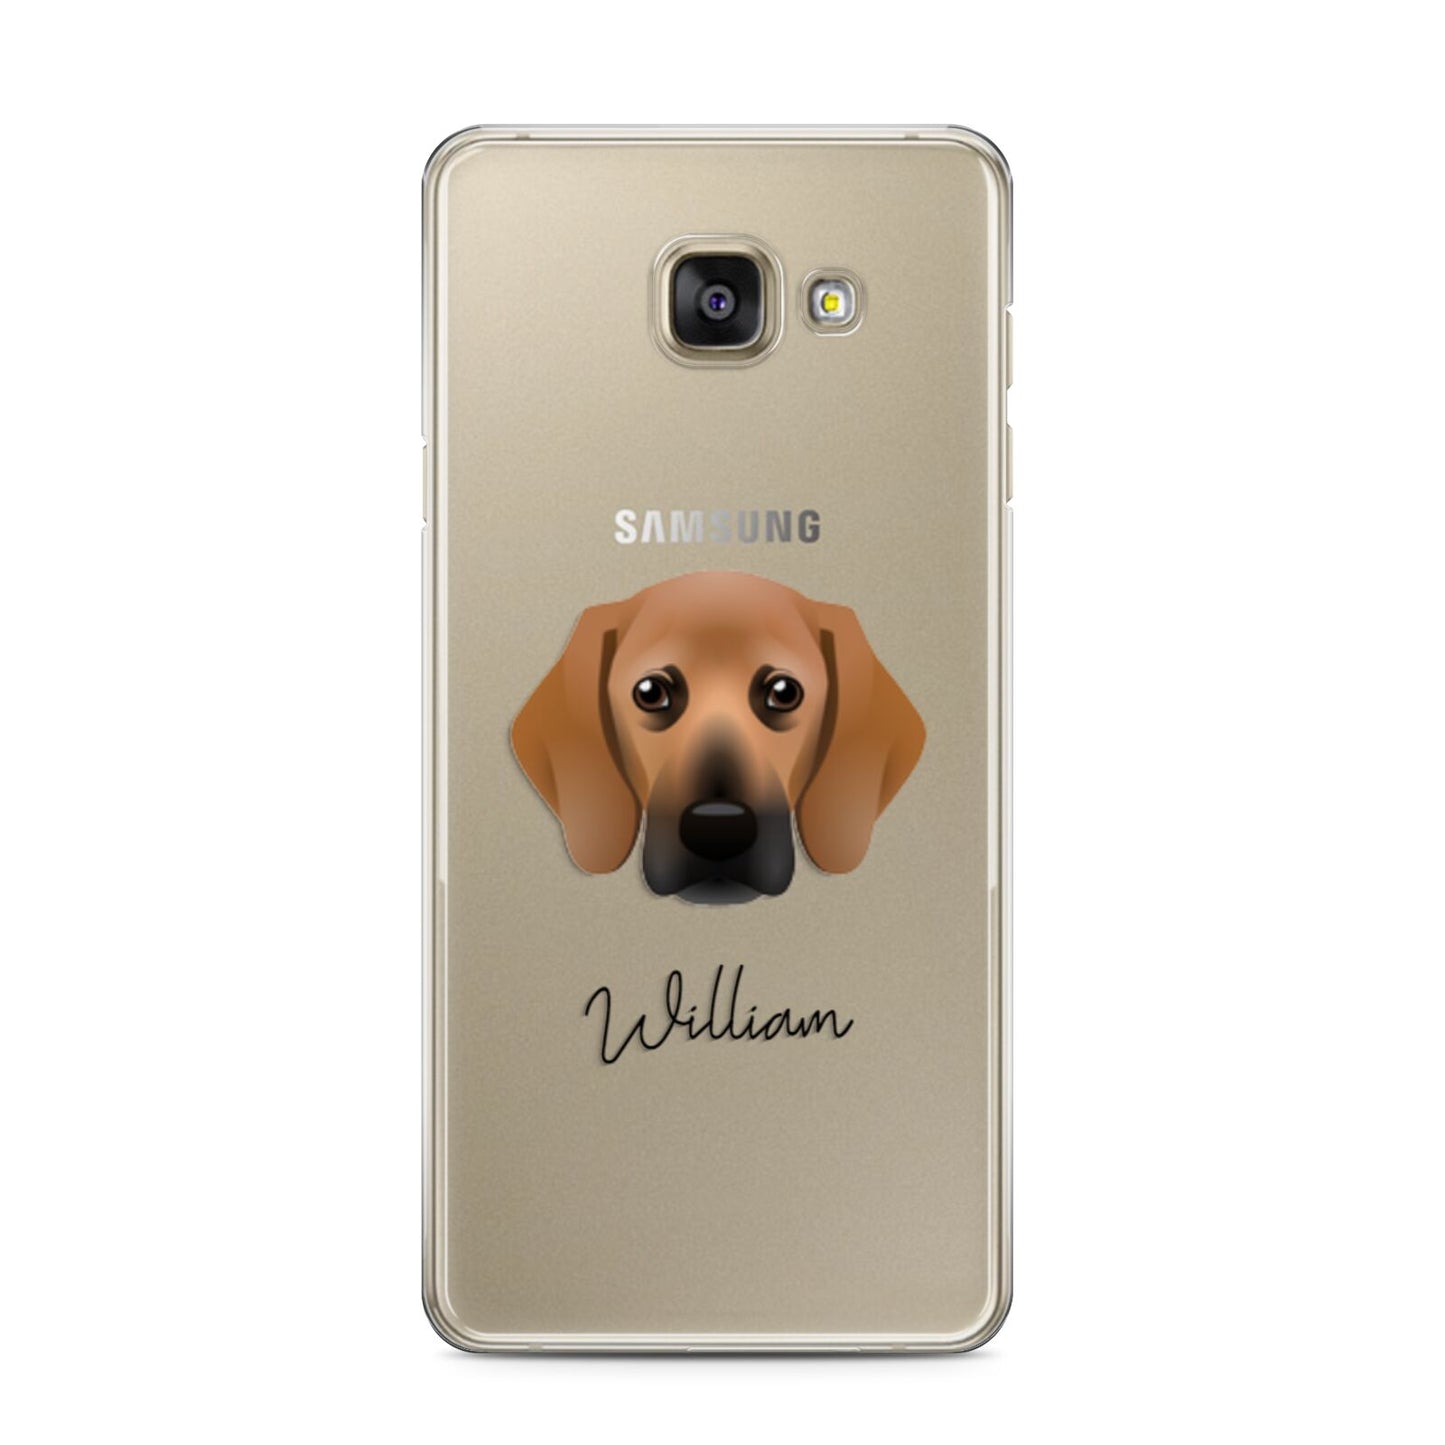 Bassugg Personalised Samsung Galaxy A3 2016 Case on gold phone